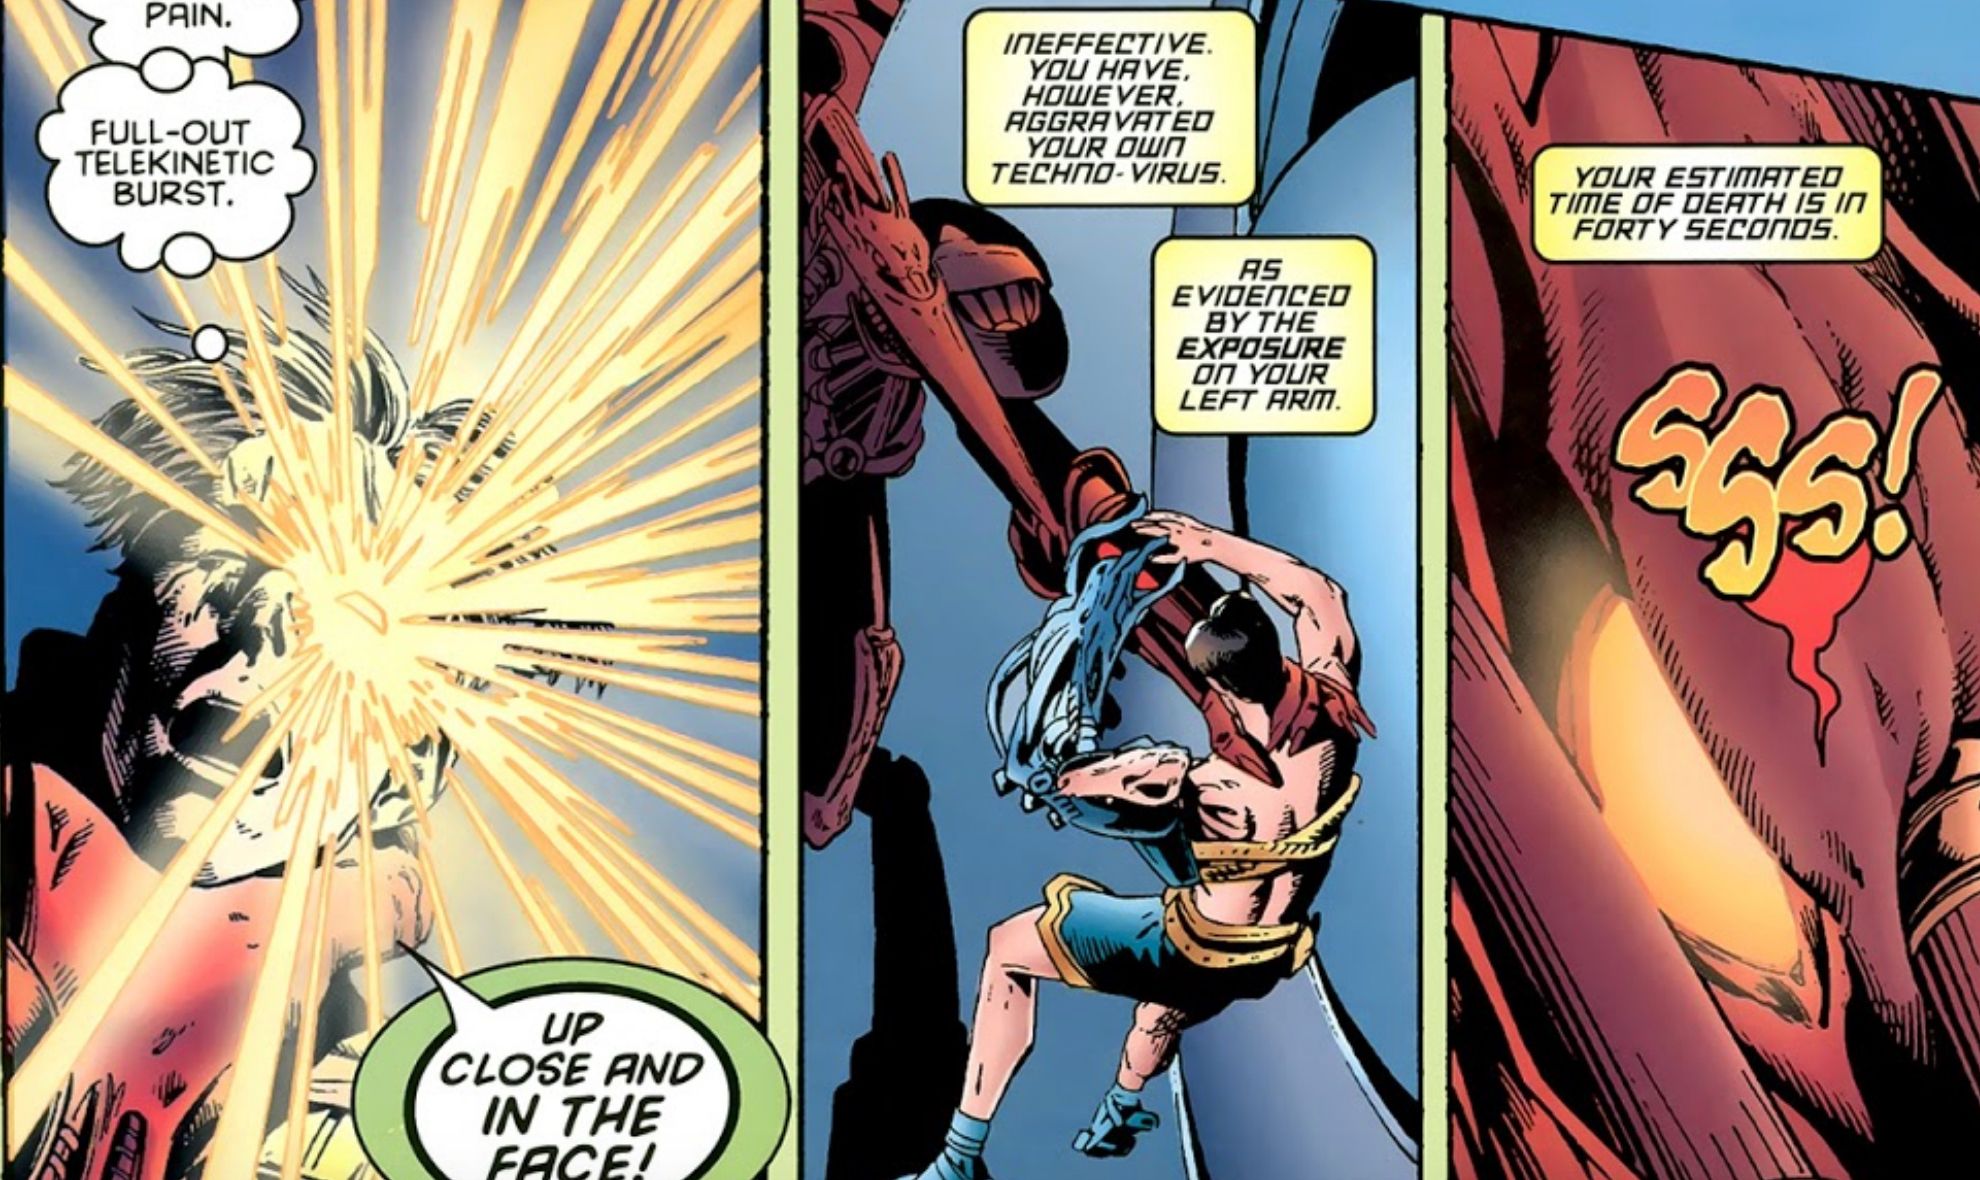 Cable Cannot Keep The TechnoVirus Controlled While Using His Powers